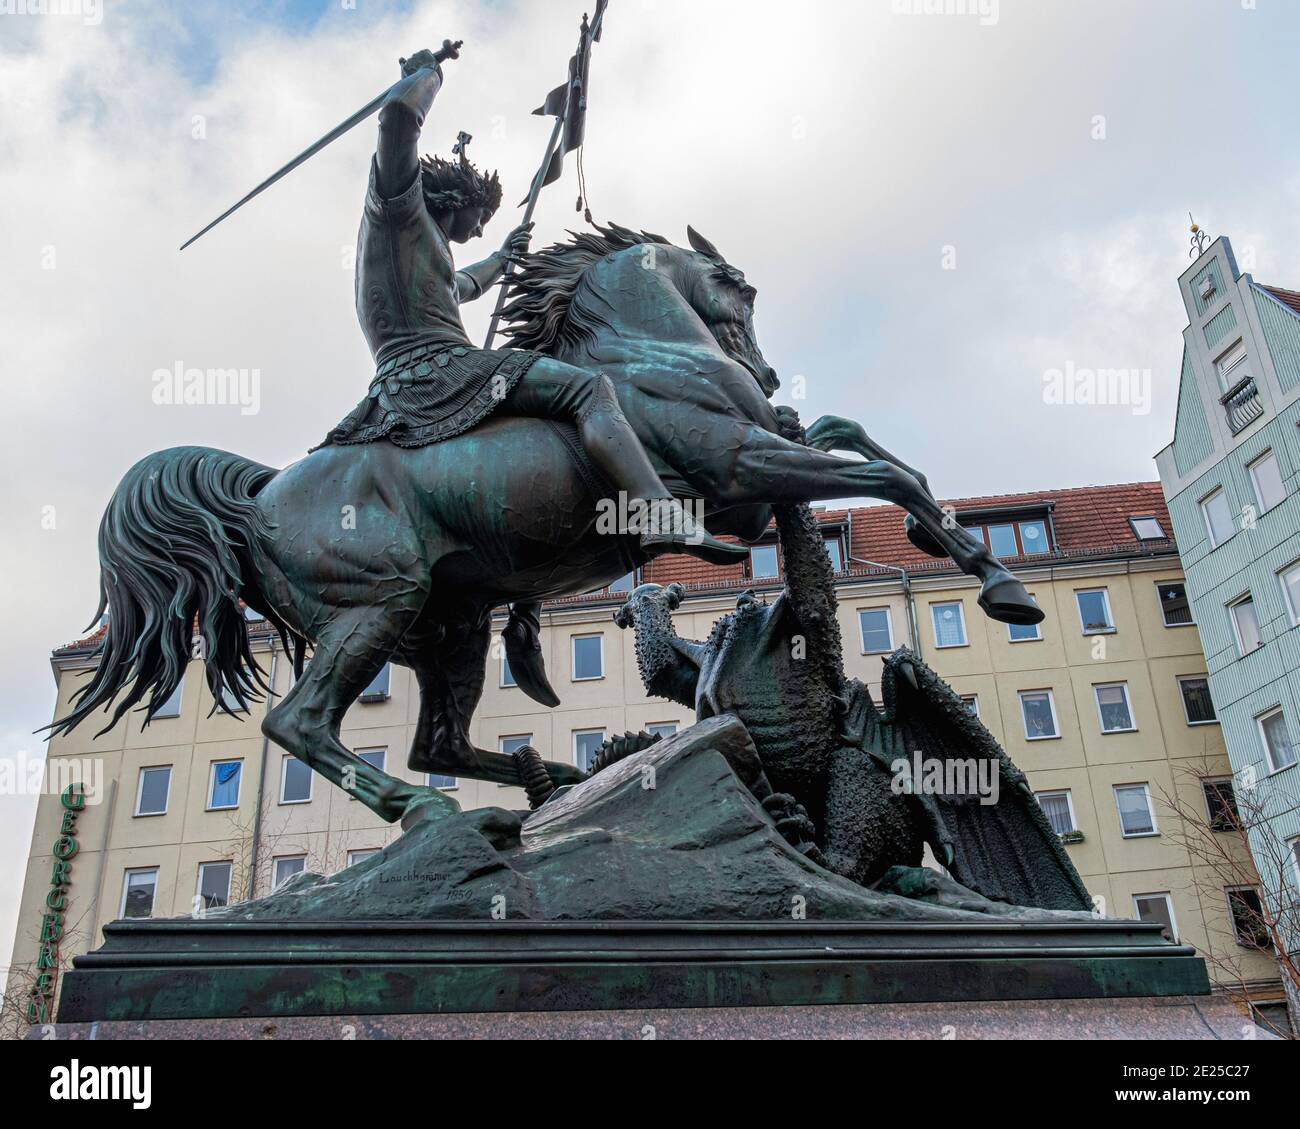 Saint George and the dragon, bronze sculpture in historic old town in Nikolaiviertel, Mitte, Berlin, Germany Stock Photo